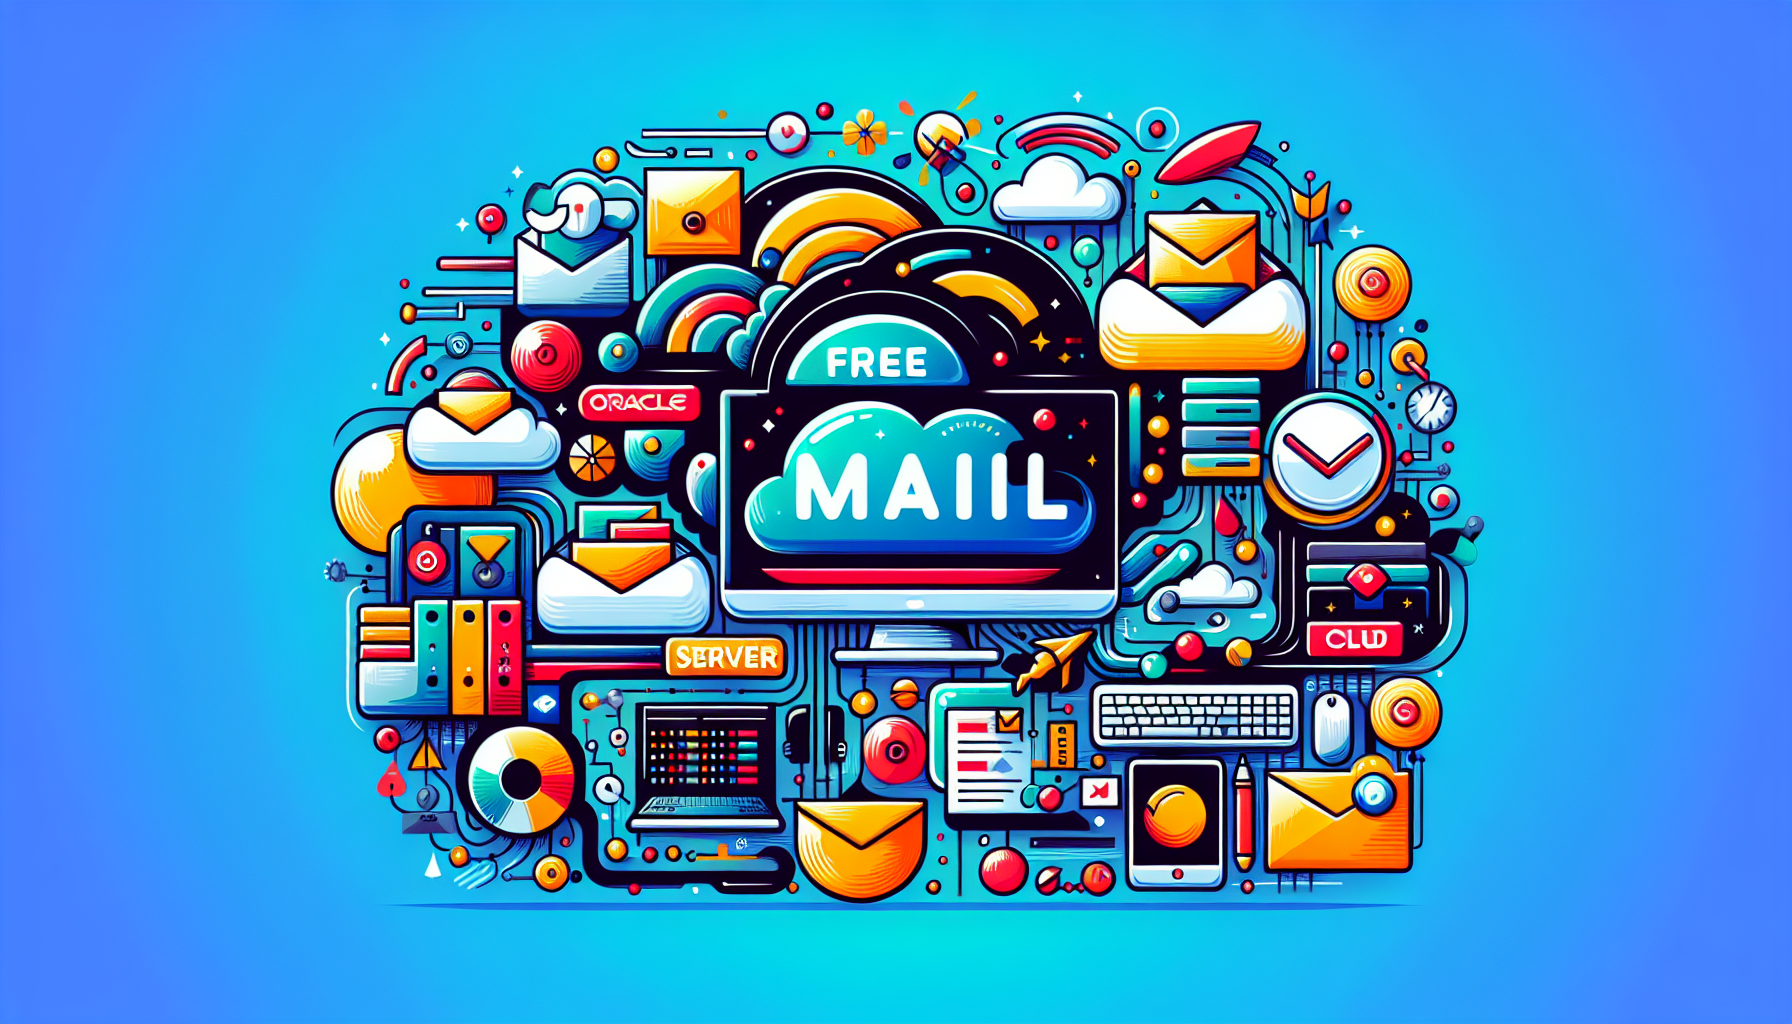 Free Mail Server on OCI – Your Domain Name